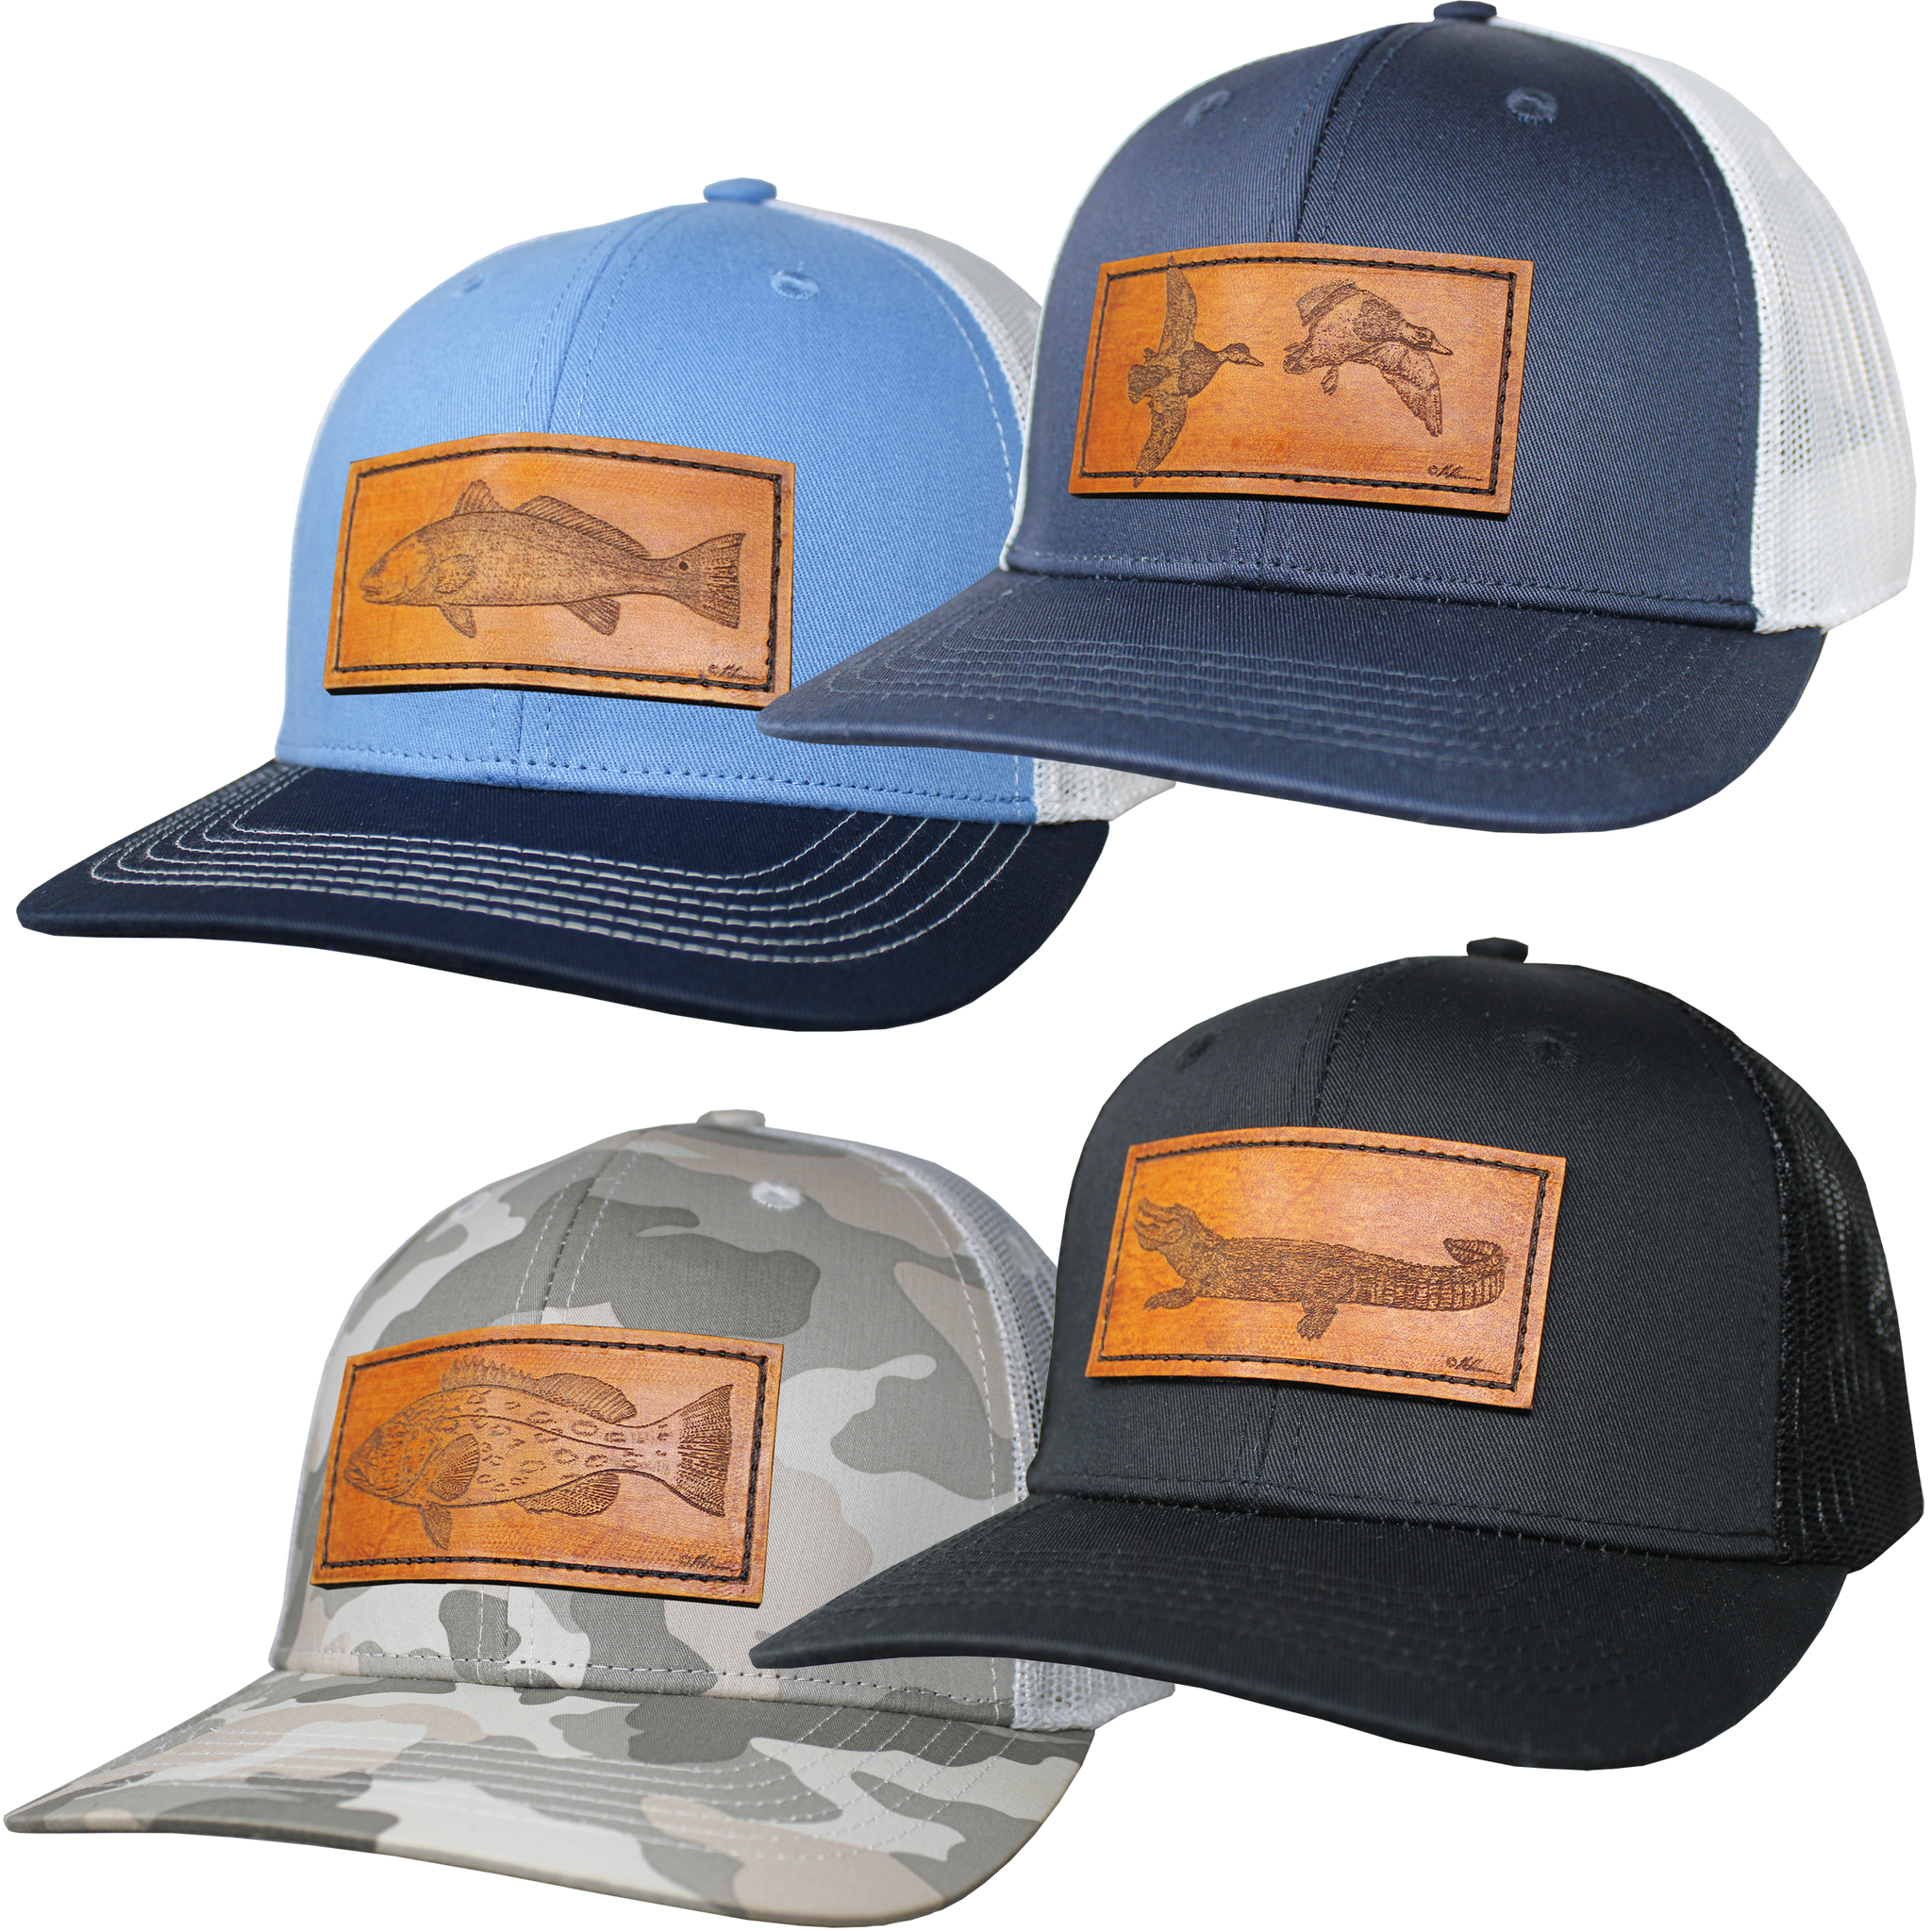 "From Trails to Trends: Mastering the Art of Performance Trucker Hat Style"